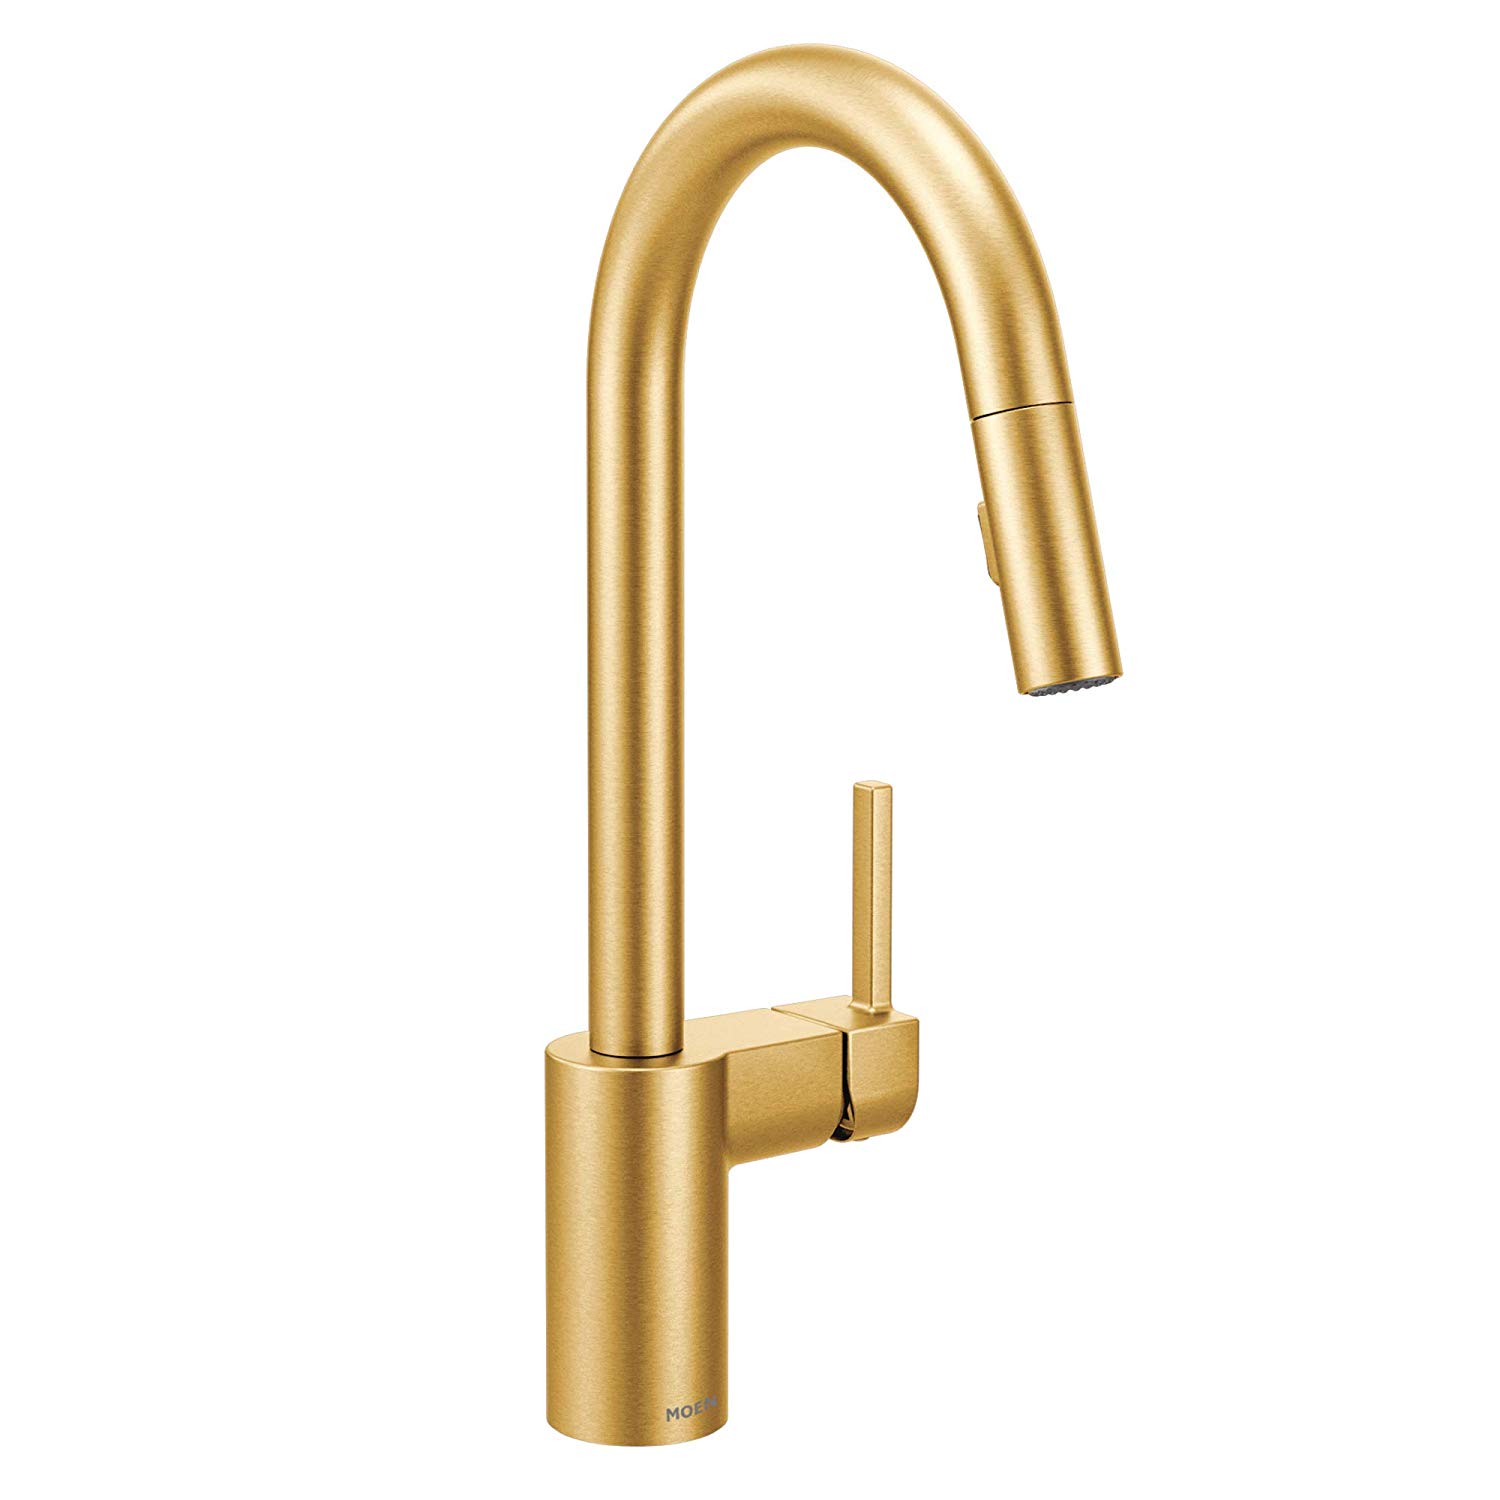 The High/Low List by Nadine Stay - Featuring Brass Accents. High end pieces and their (cheaper) twins. Brass home decor, furniture, and accessories. Brass kitchen faucet from Moen.